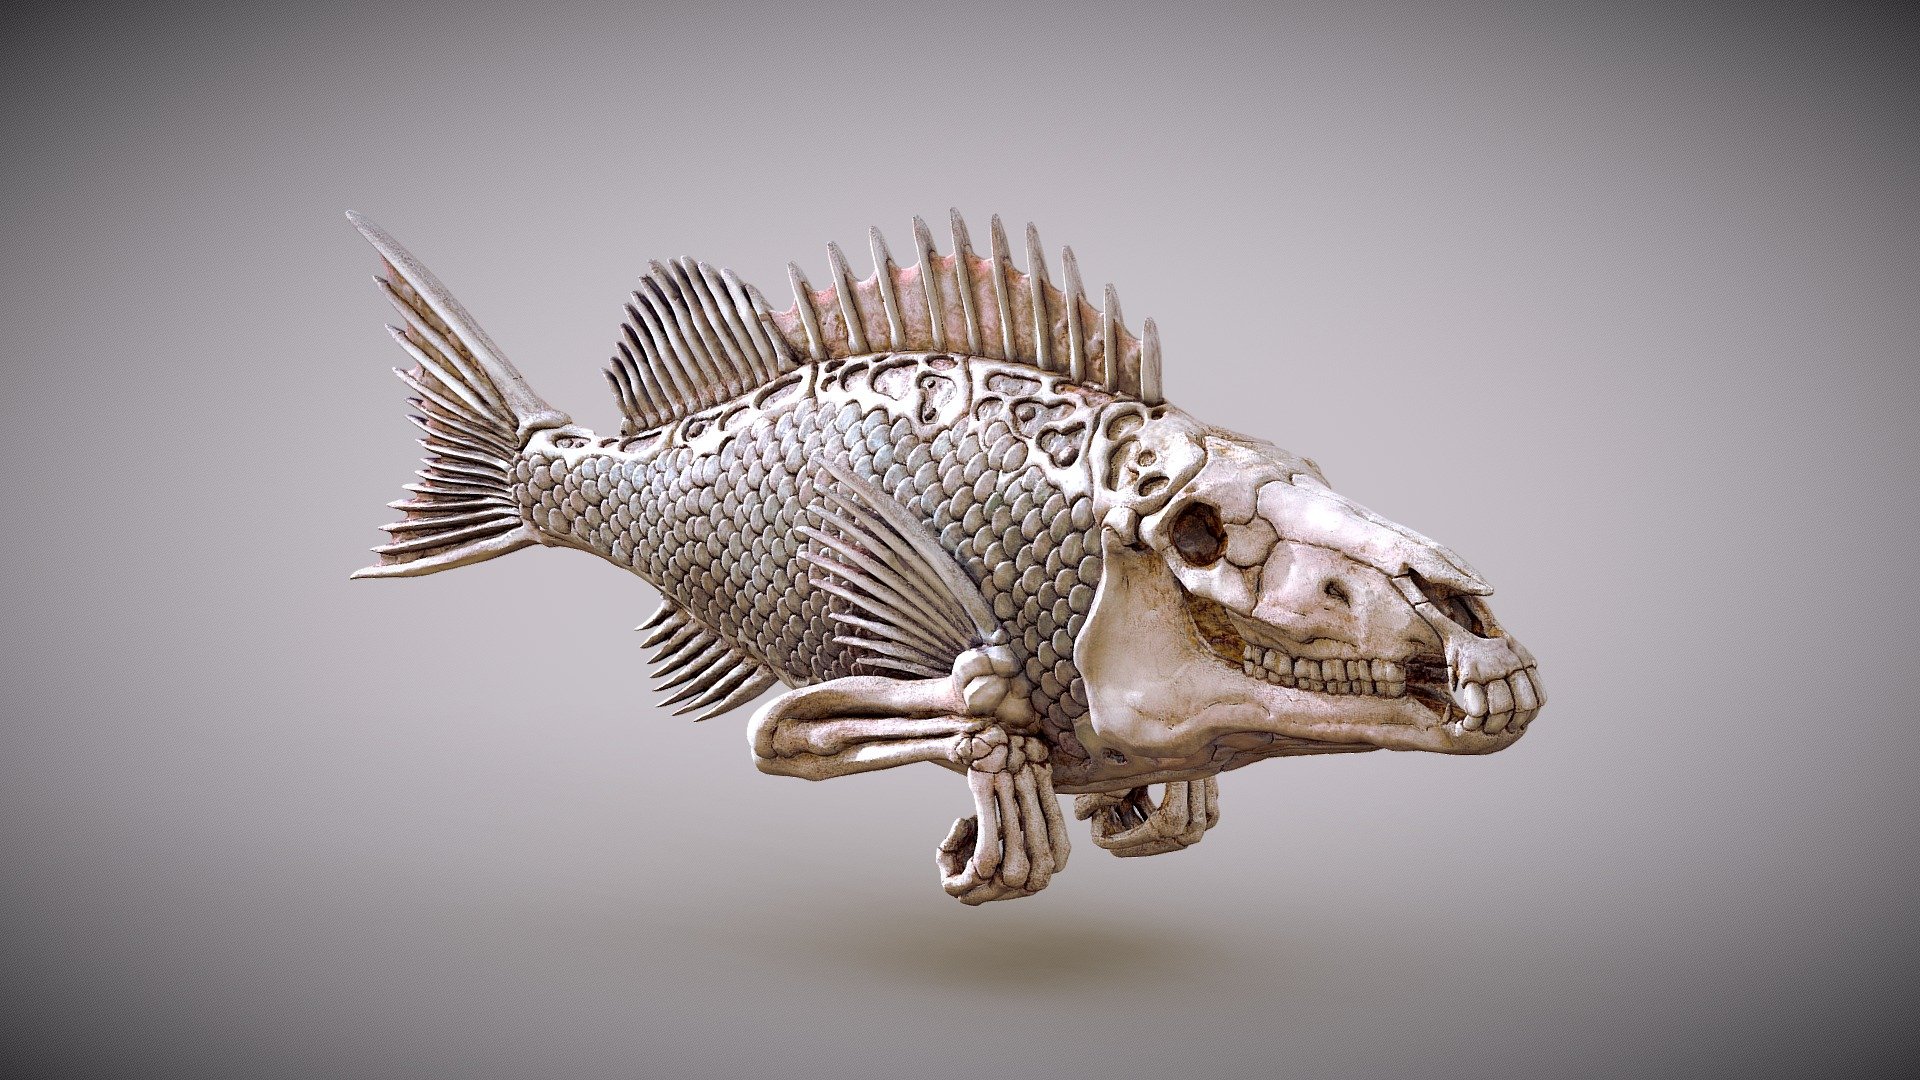 continuation of the fish theme .... 3d model inspired from wall art - noname artist - FISHHead2 - 3D model by Alex Dubnoff (@alexdubnoff) 3d model